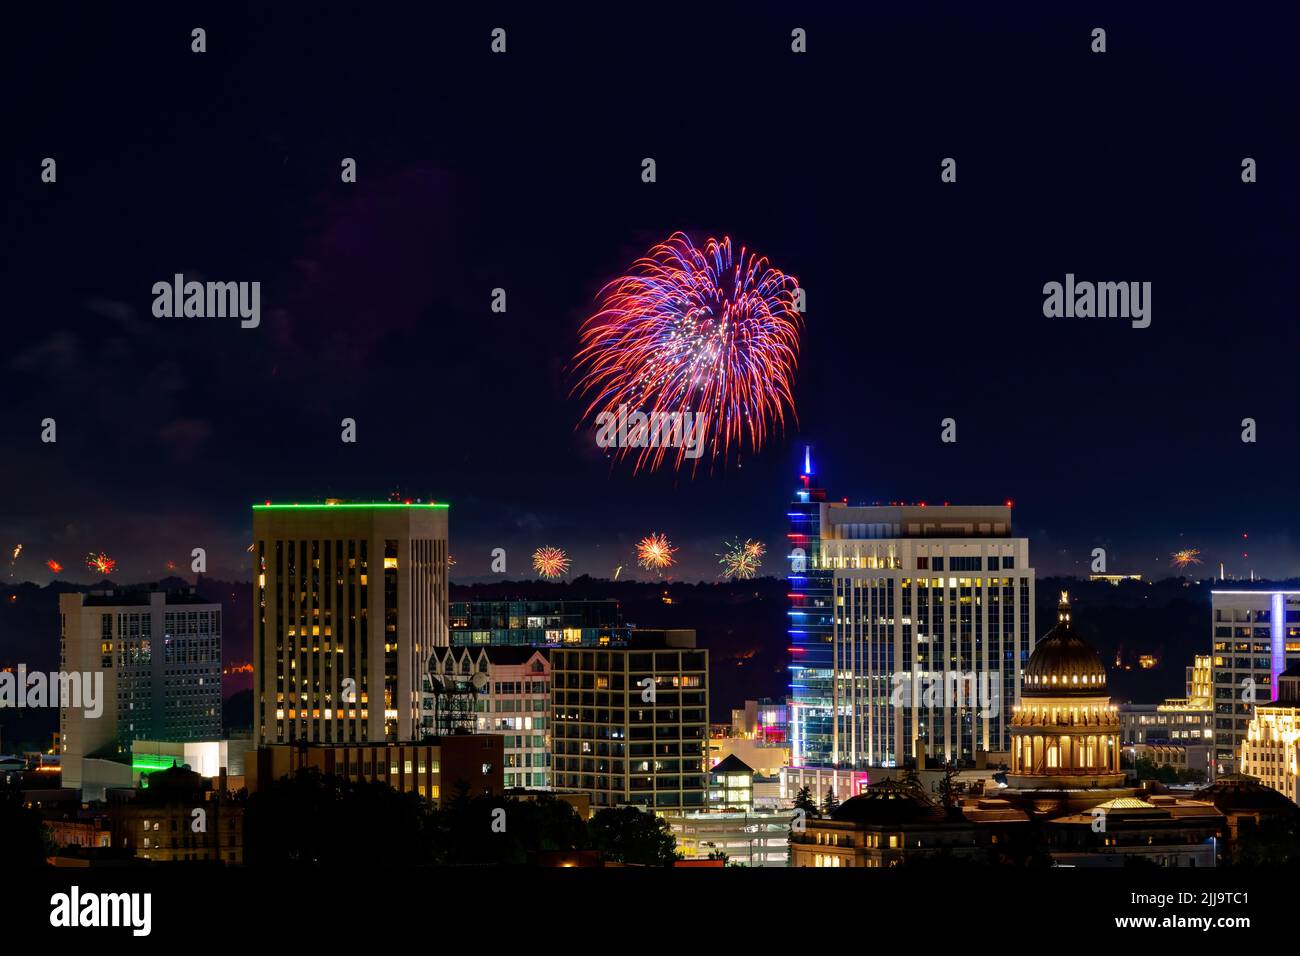 Fireworks Fourth of July and Boise night skyline Stock Photo